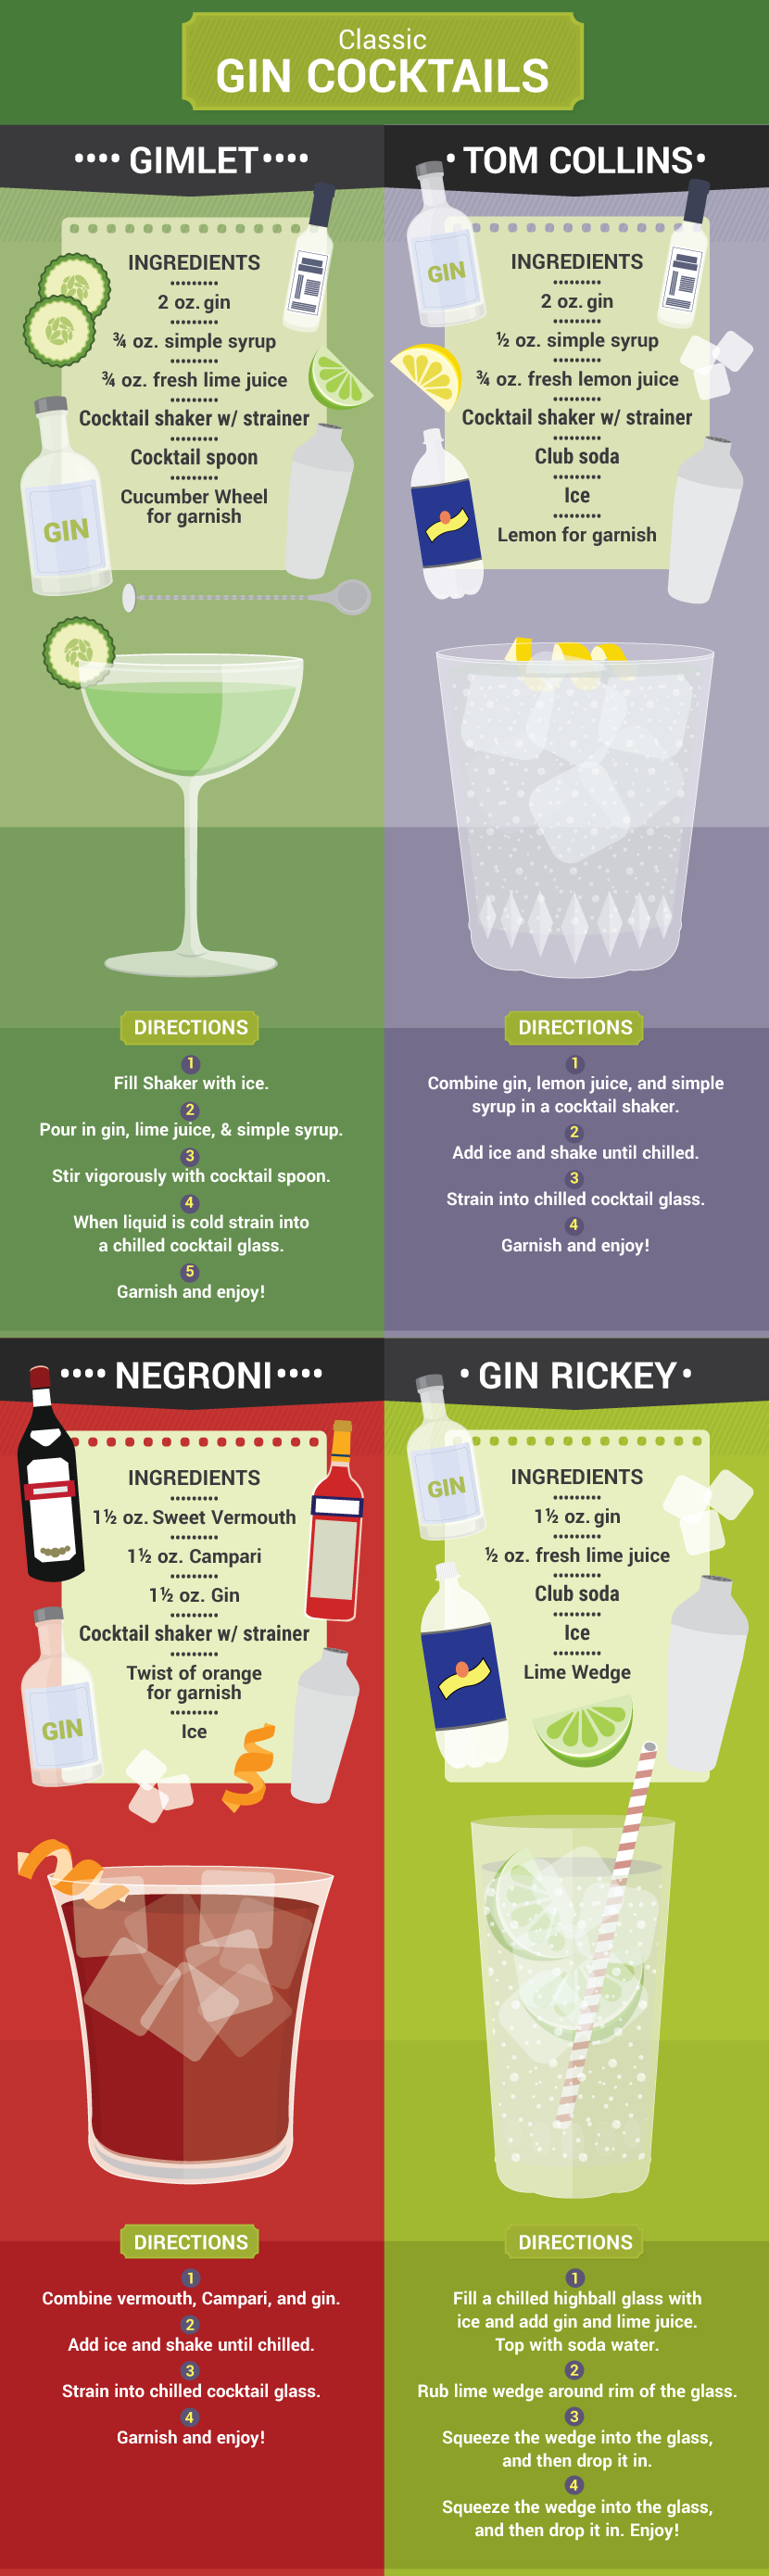 Classic Gin Cocktails - Gin Guide